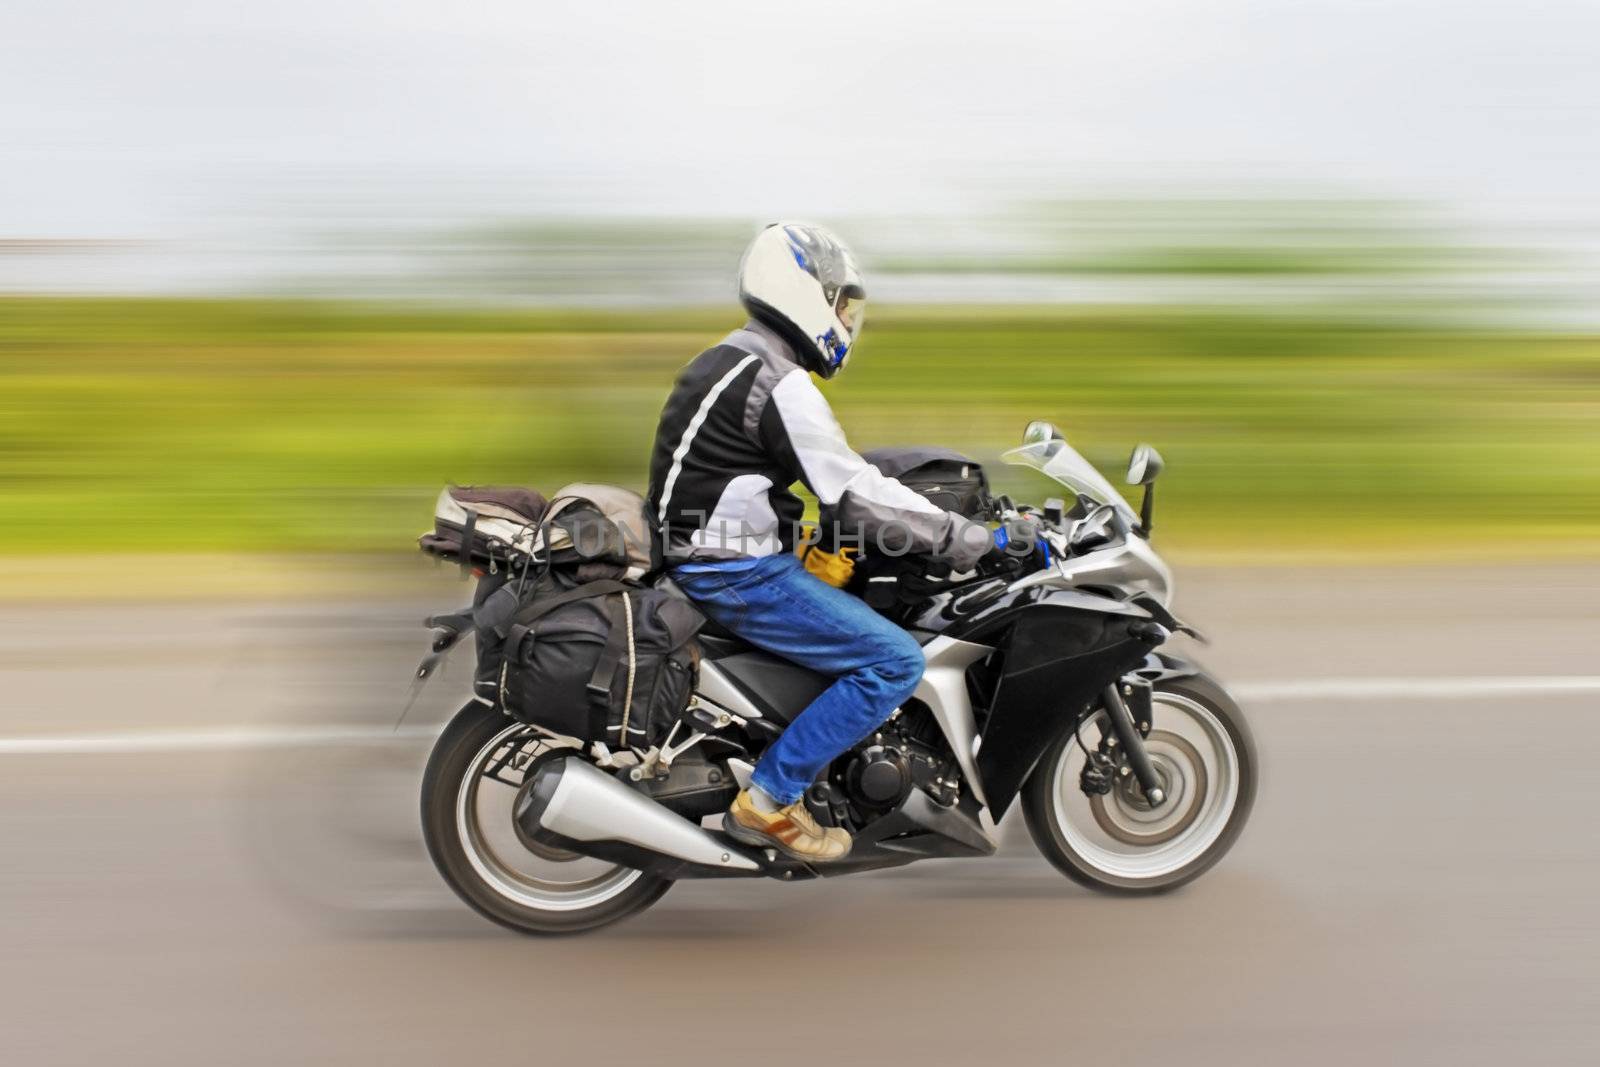 Touring motorcyclist speeding to get home from recent tour. Shot location, Maharashtra, India